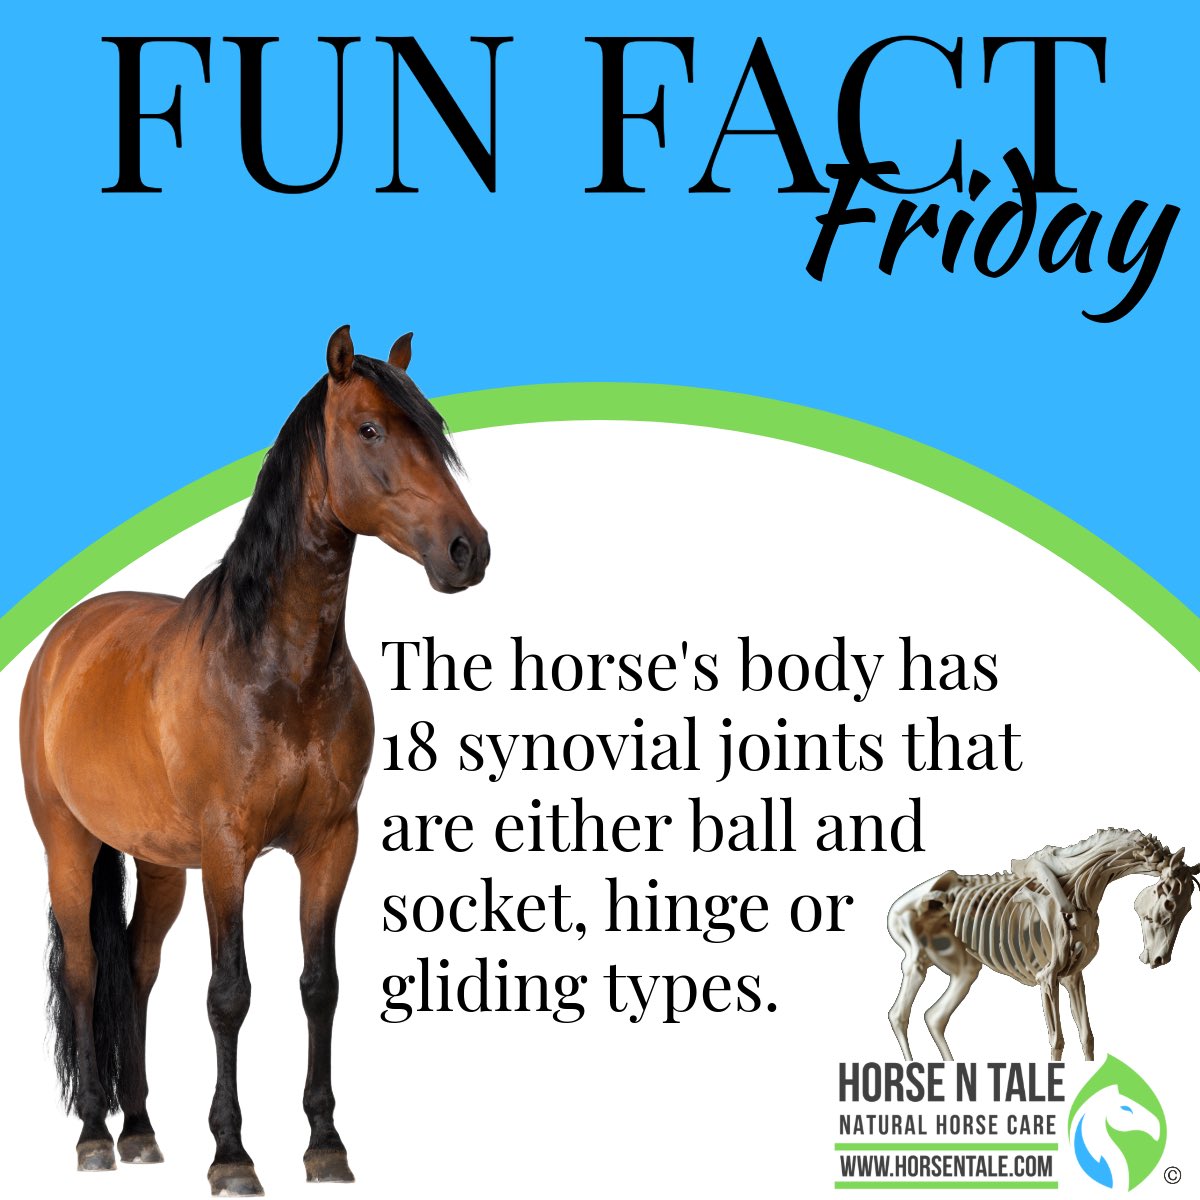 Fascinating Fun Fact Friday! 

#horsentale #topicalequineproducts #naturalhorsecare #equine #horse #naturalingredients 
#horselife #horsemanship #teamhnt #teamhorsentale 
#horseshow #horses
#horselover 
#horseracing 
#friday #funfactfriday #fridays #fridayfeeling #funfriday